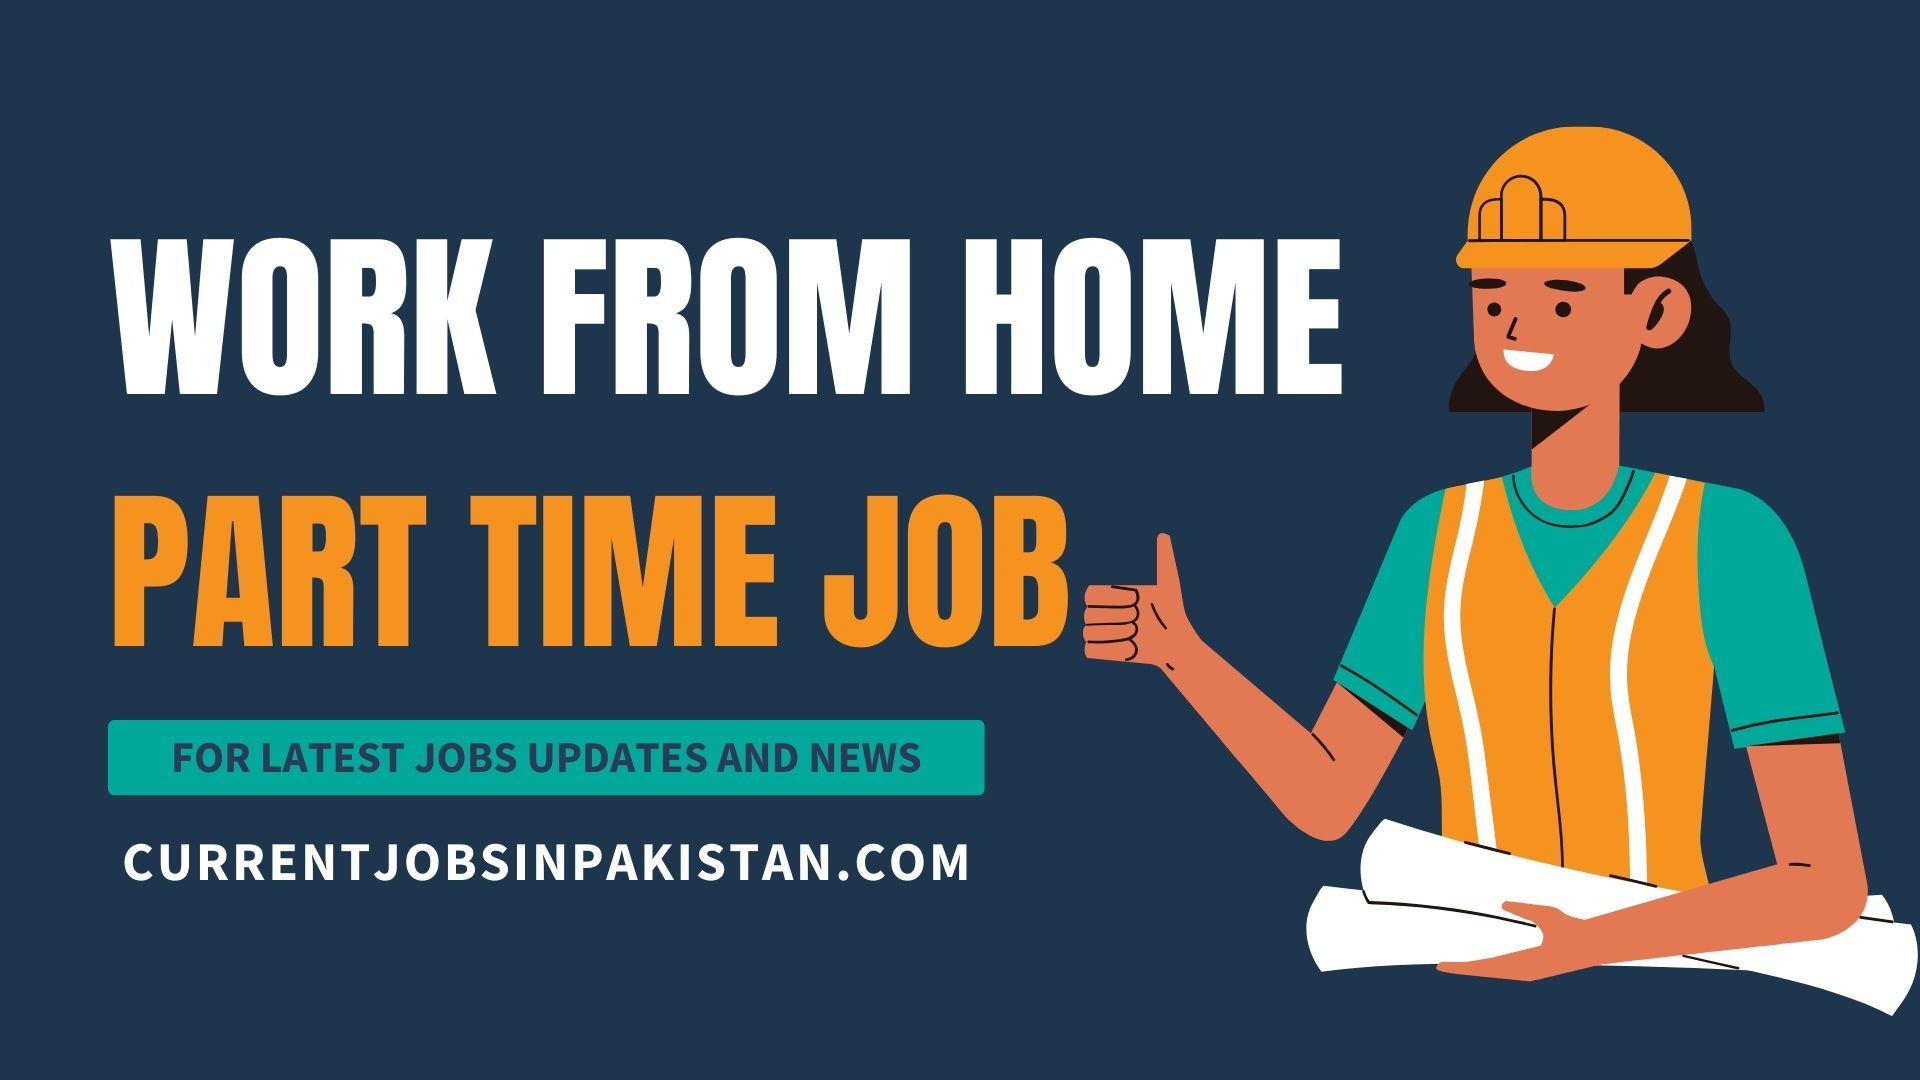 work from home part time jobs near me